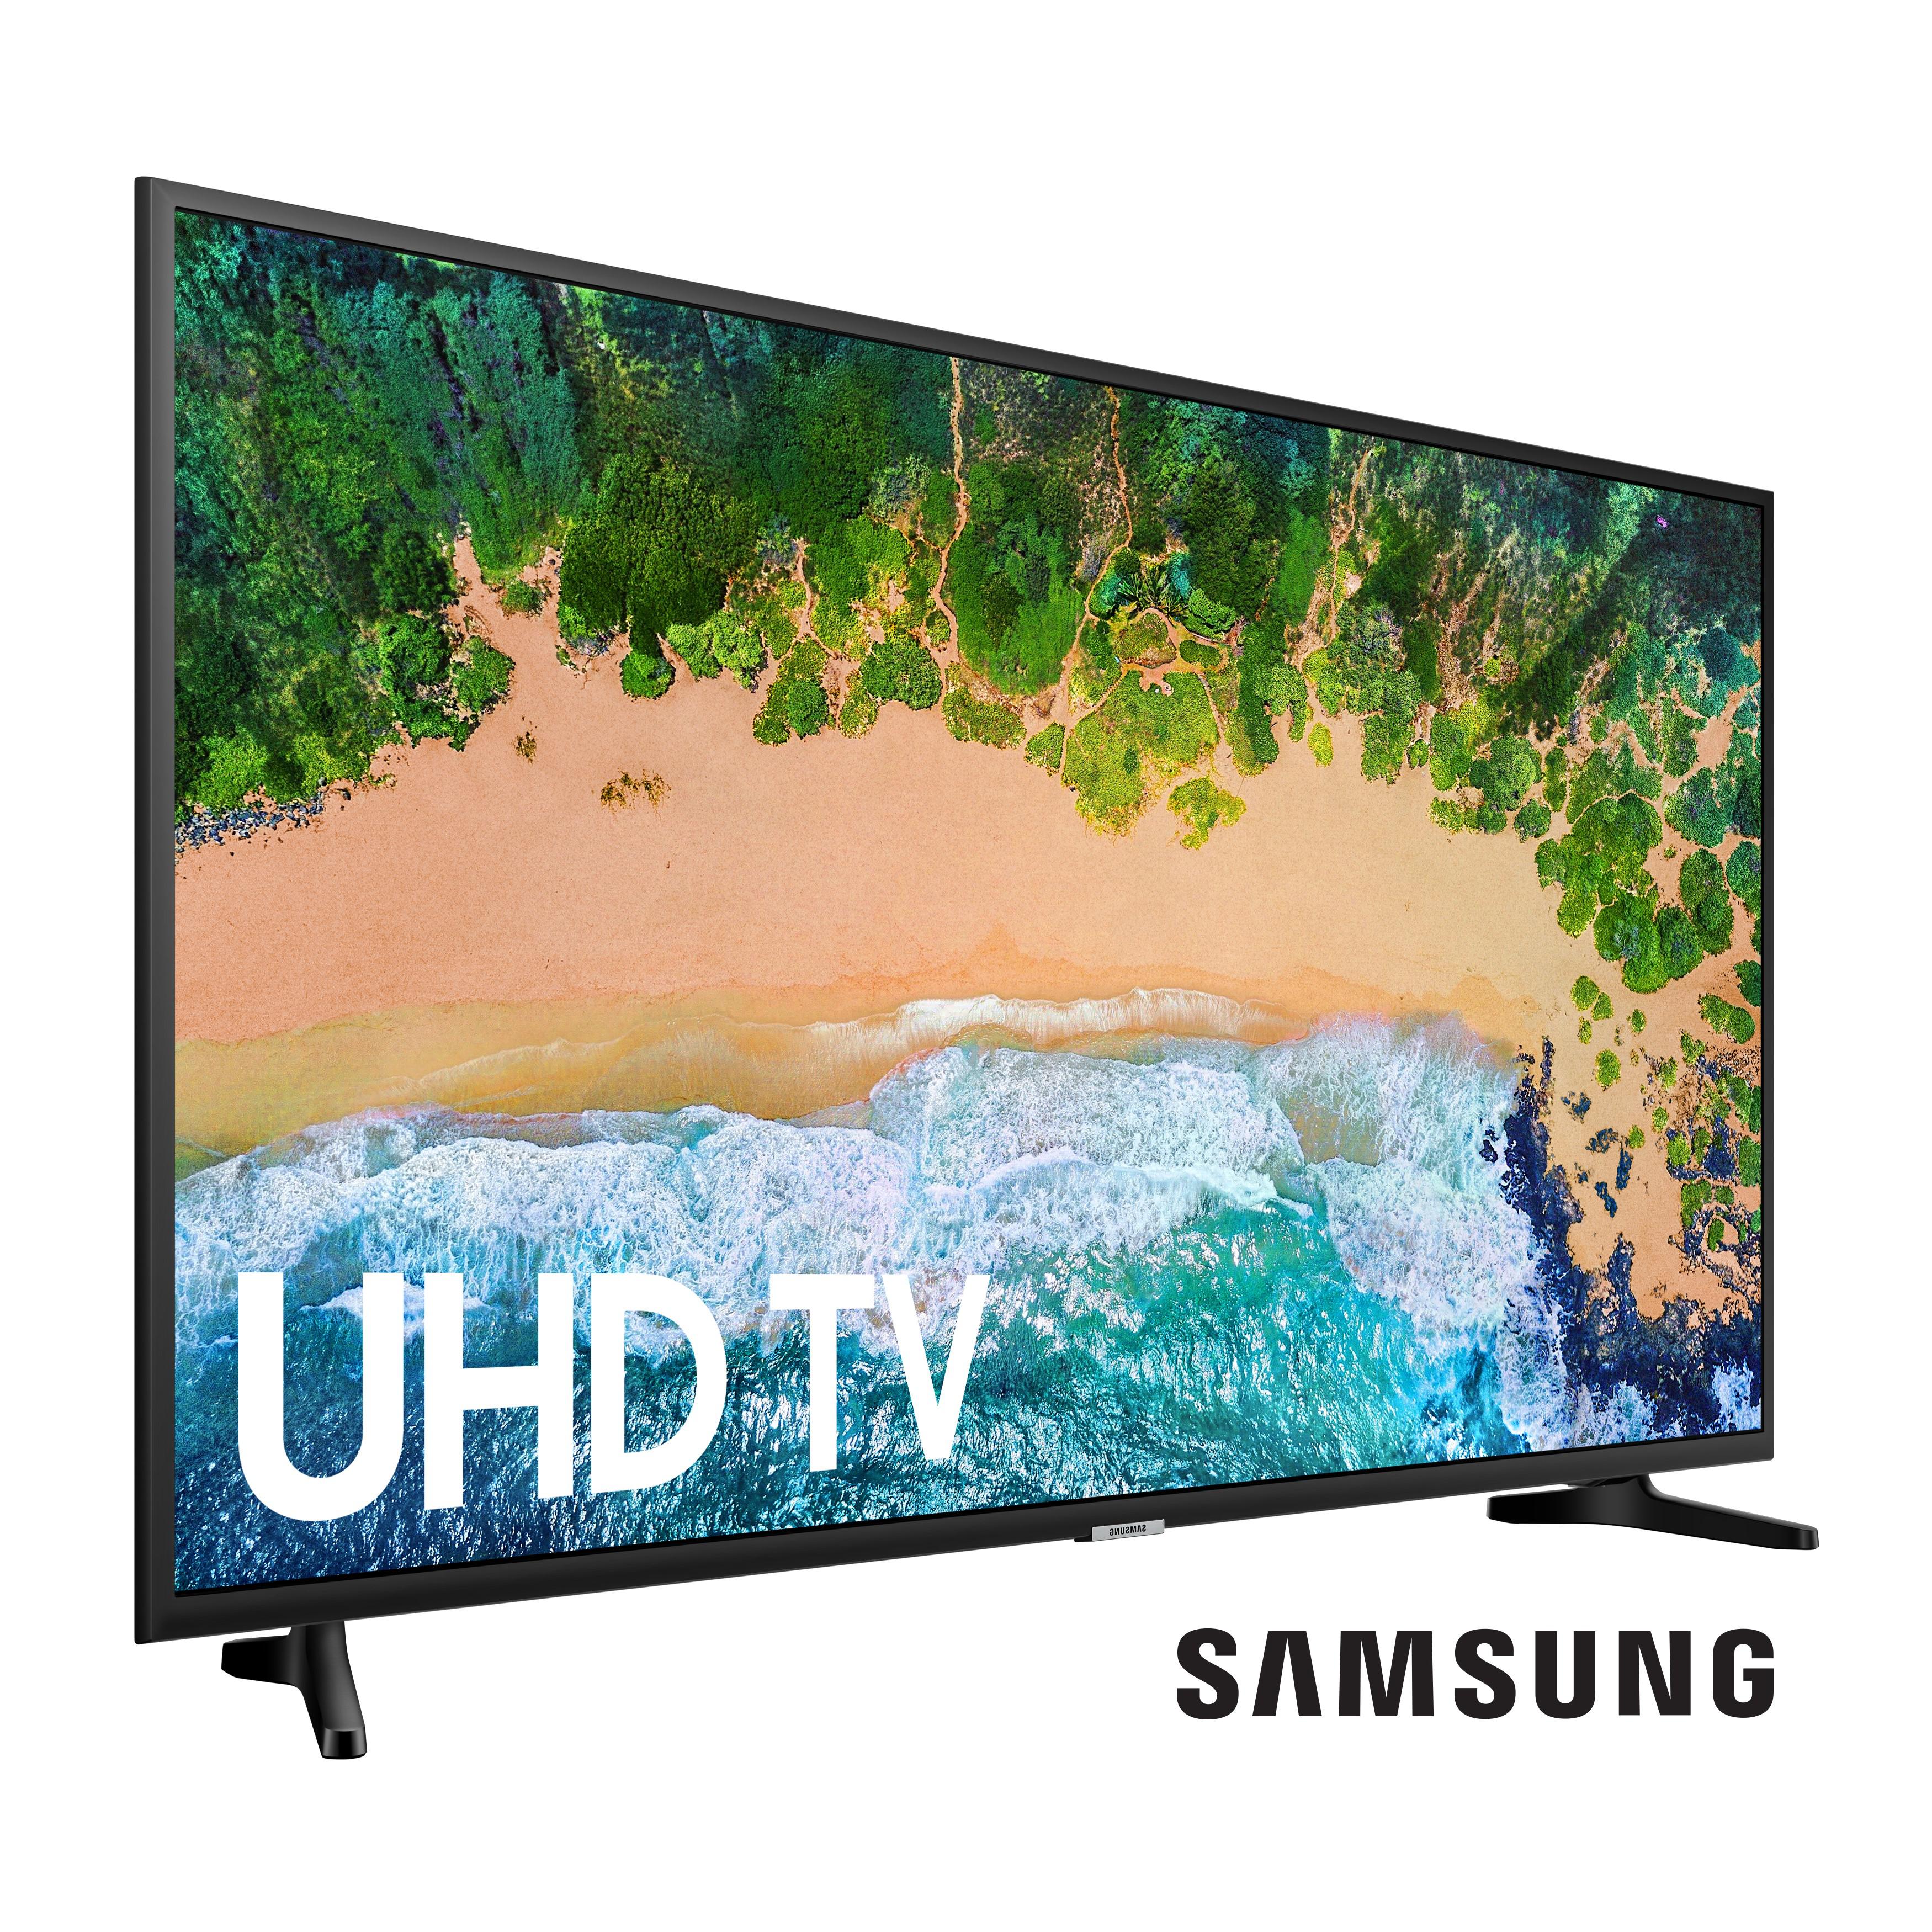 SAMSUNG 65" Class 4K UHD 2160p LED Smart TV with HDR UN65NU6900 - image 3 of 20